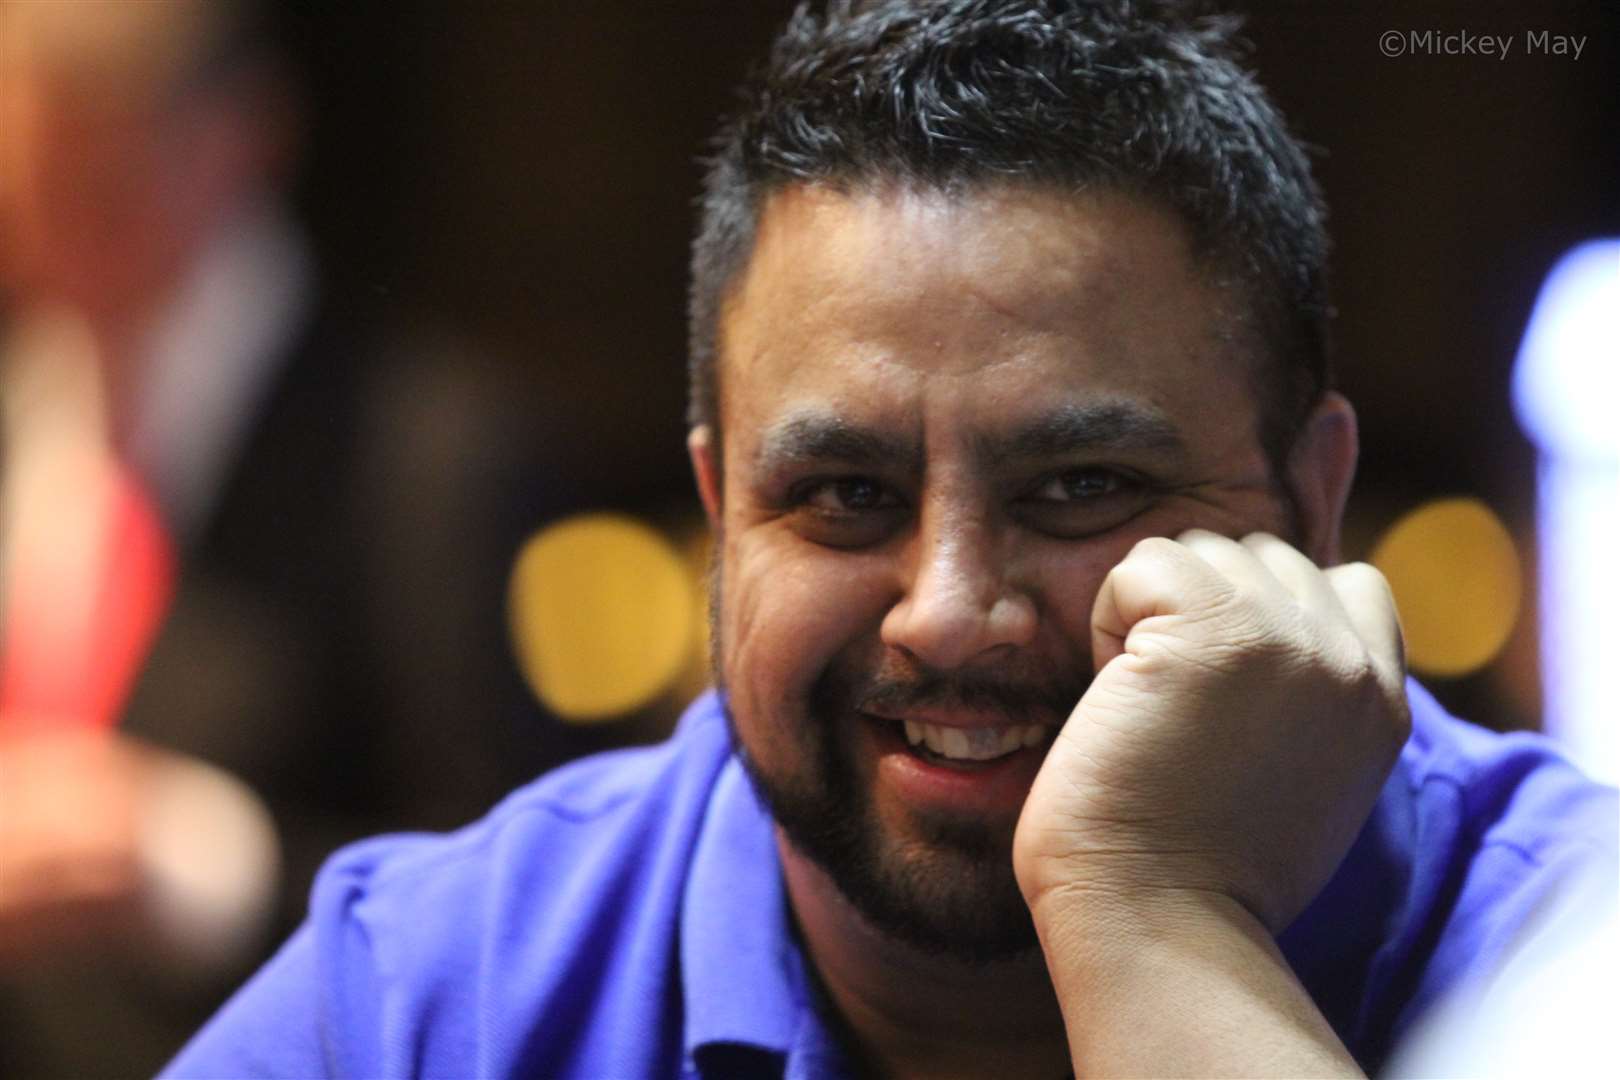 Rapinder walked away with over £70,000 from a table of world-class players. Credit: Mickey May